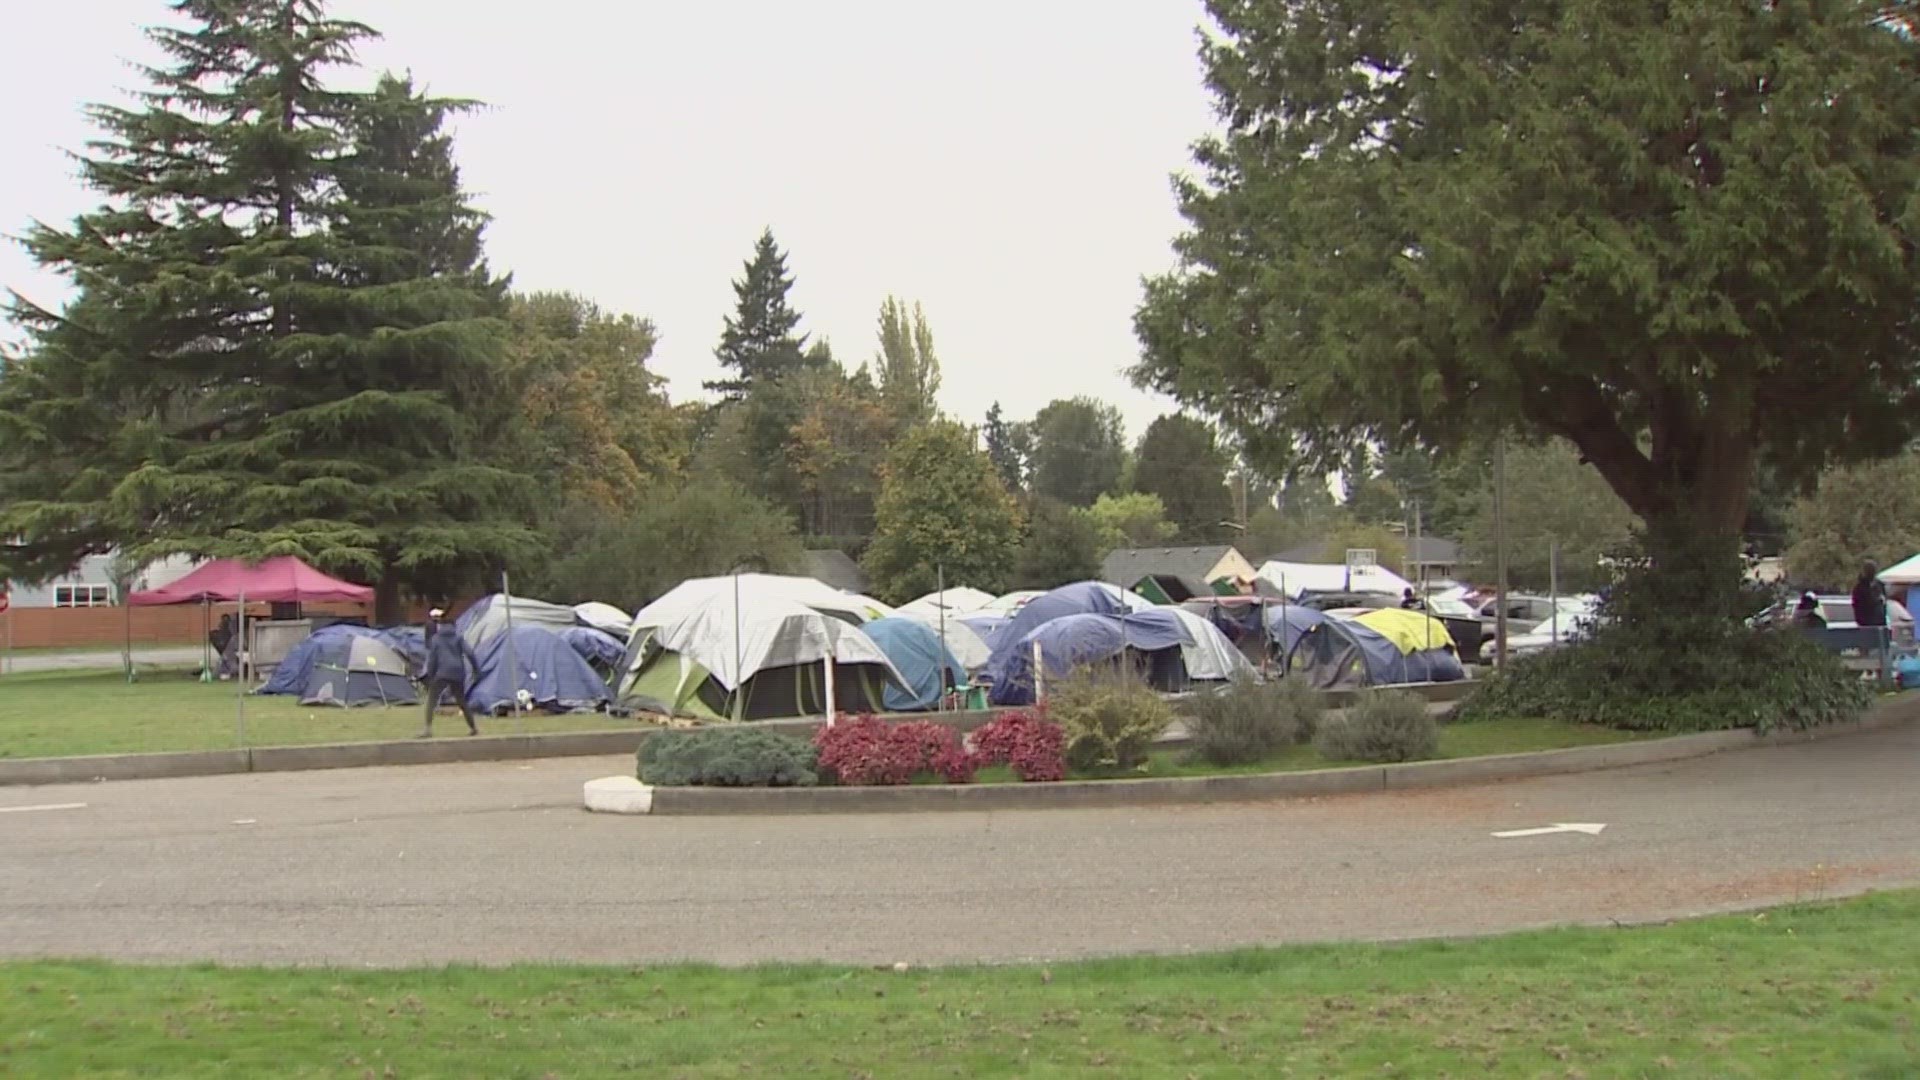 When the City of Tukwila declared an emergency due to the increasing number of migrants, there were 180 migrants at the camp. Two weeks later, and there are now 300.